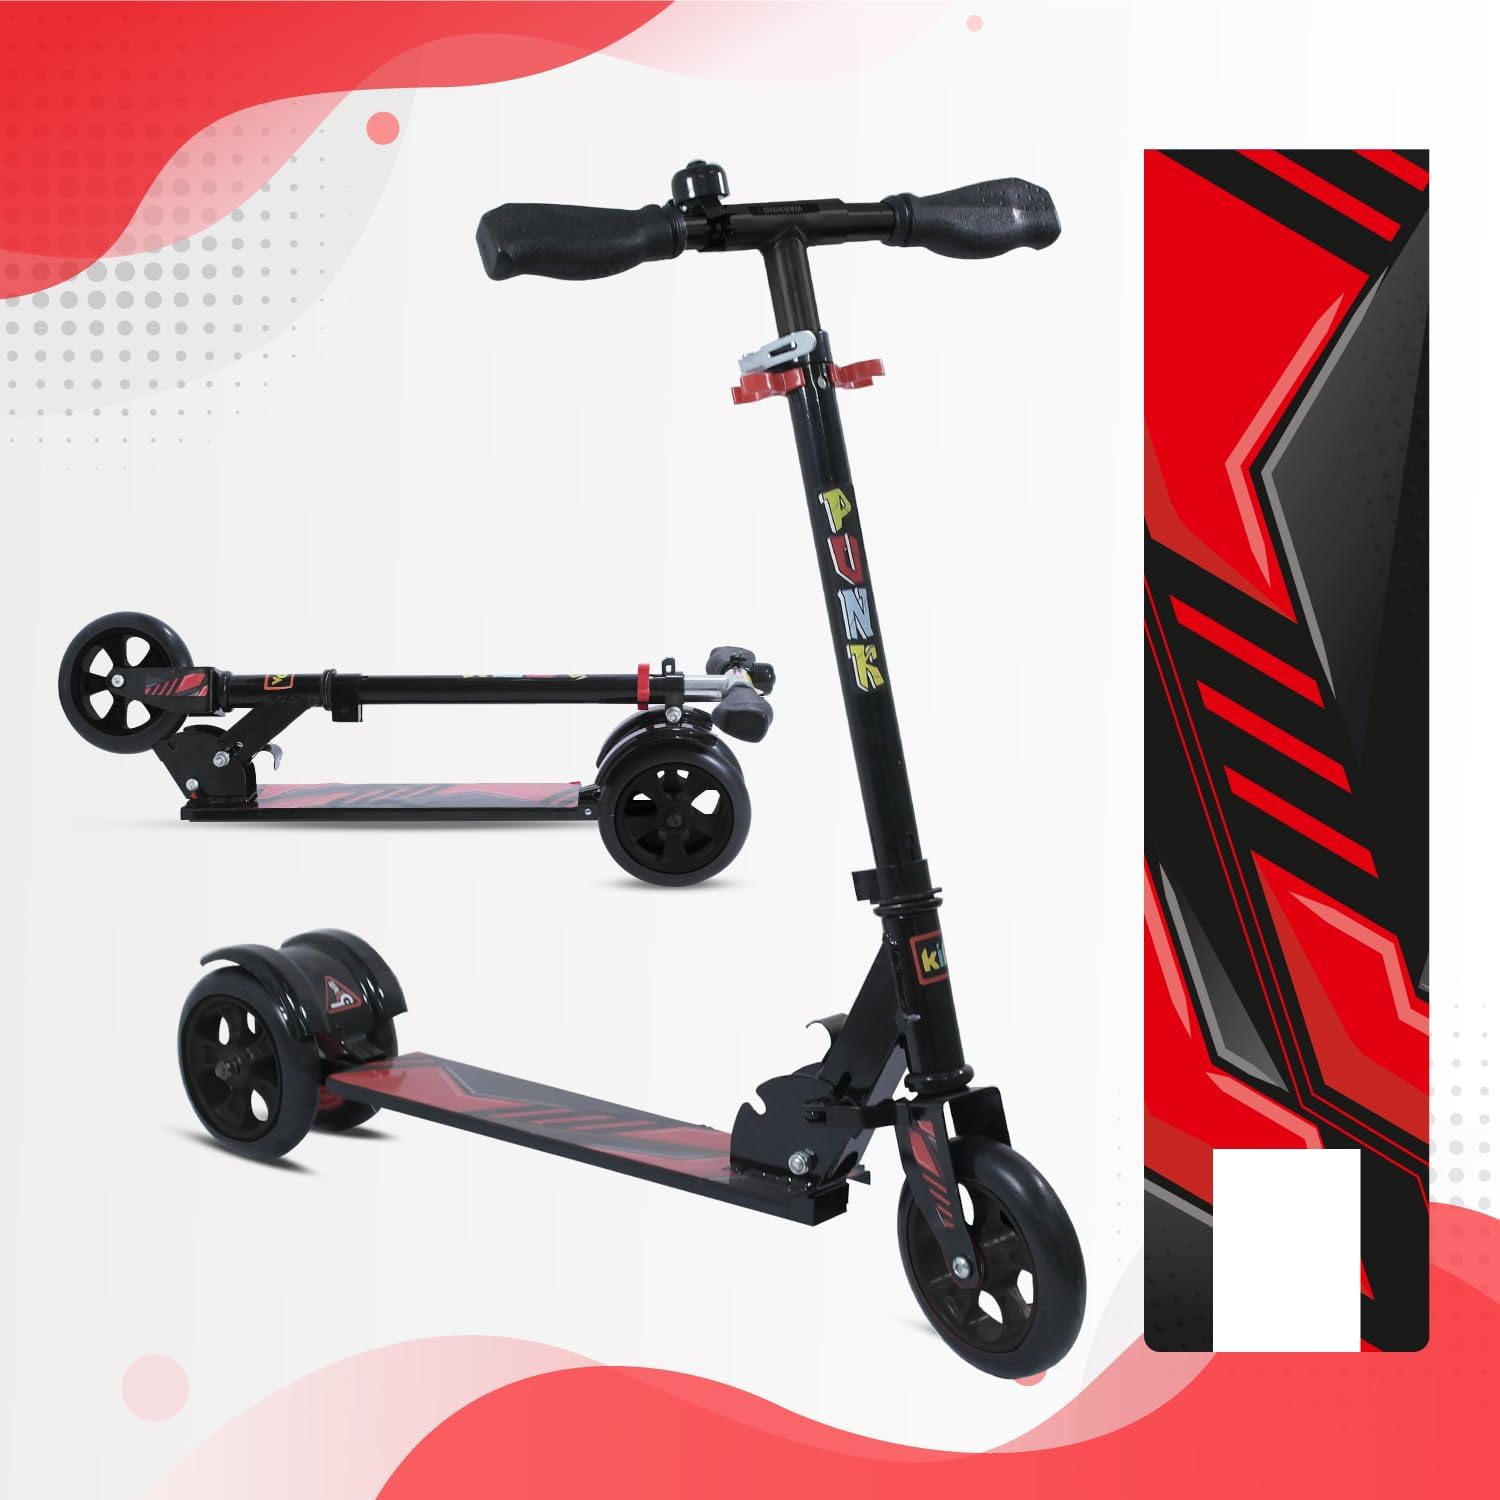 Braintastic 3-Wheel Design Drift Kick Scooter with Rear Break 3-Level Height Adjustment PVC Wheels Weight Capacity 50 kg for Kids